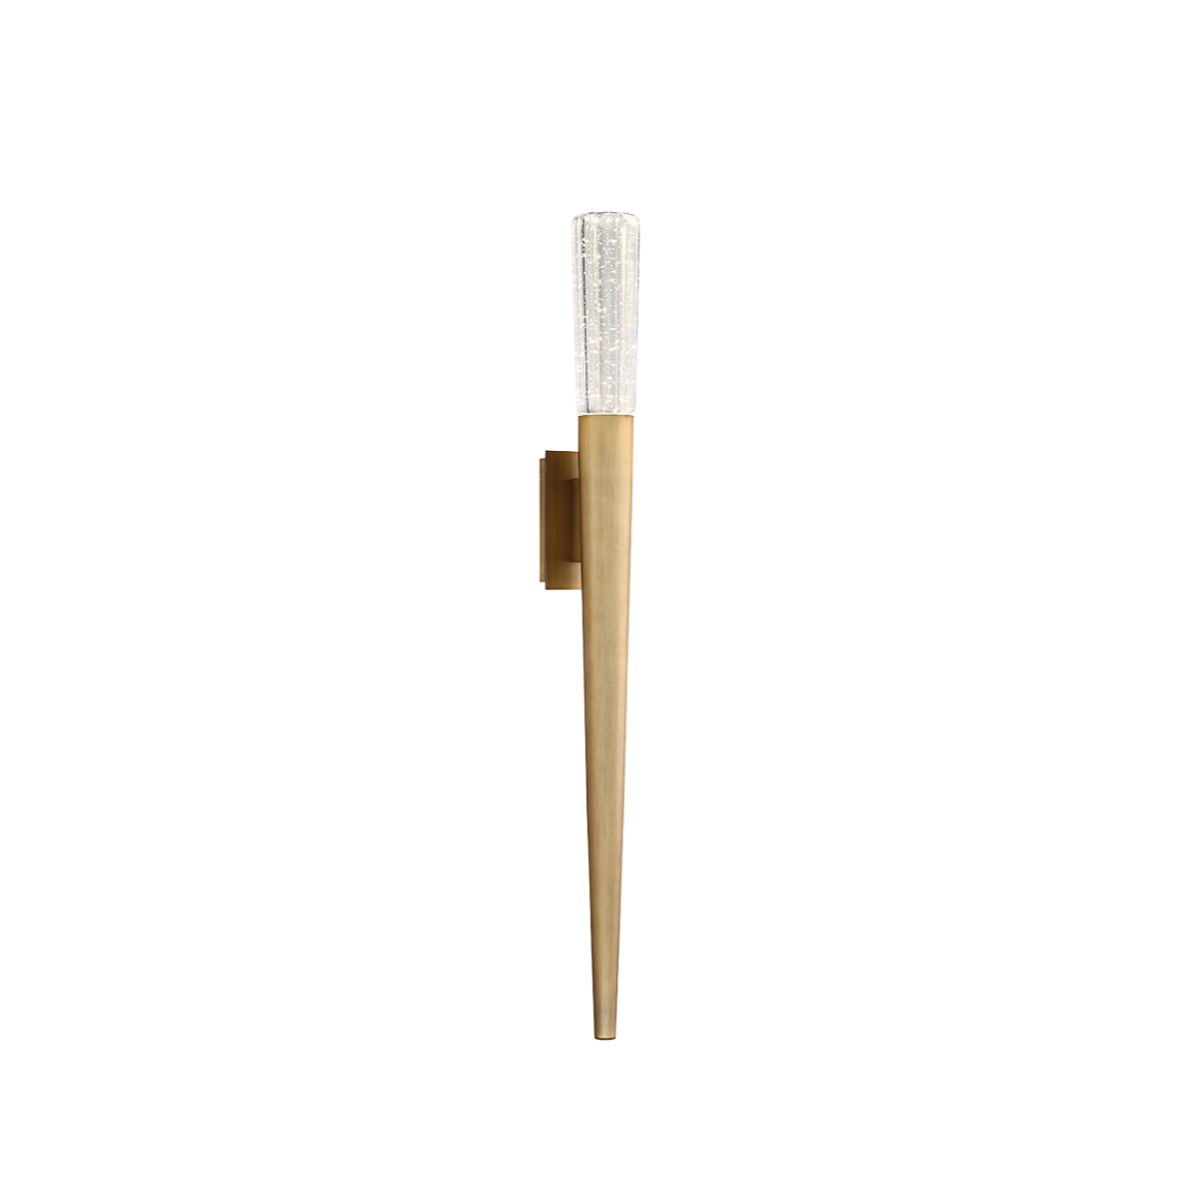 Modern Forms Scepter Wall Sconce Light